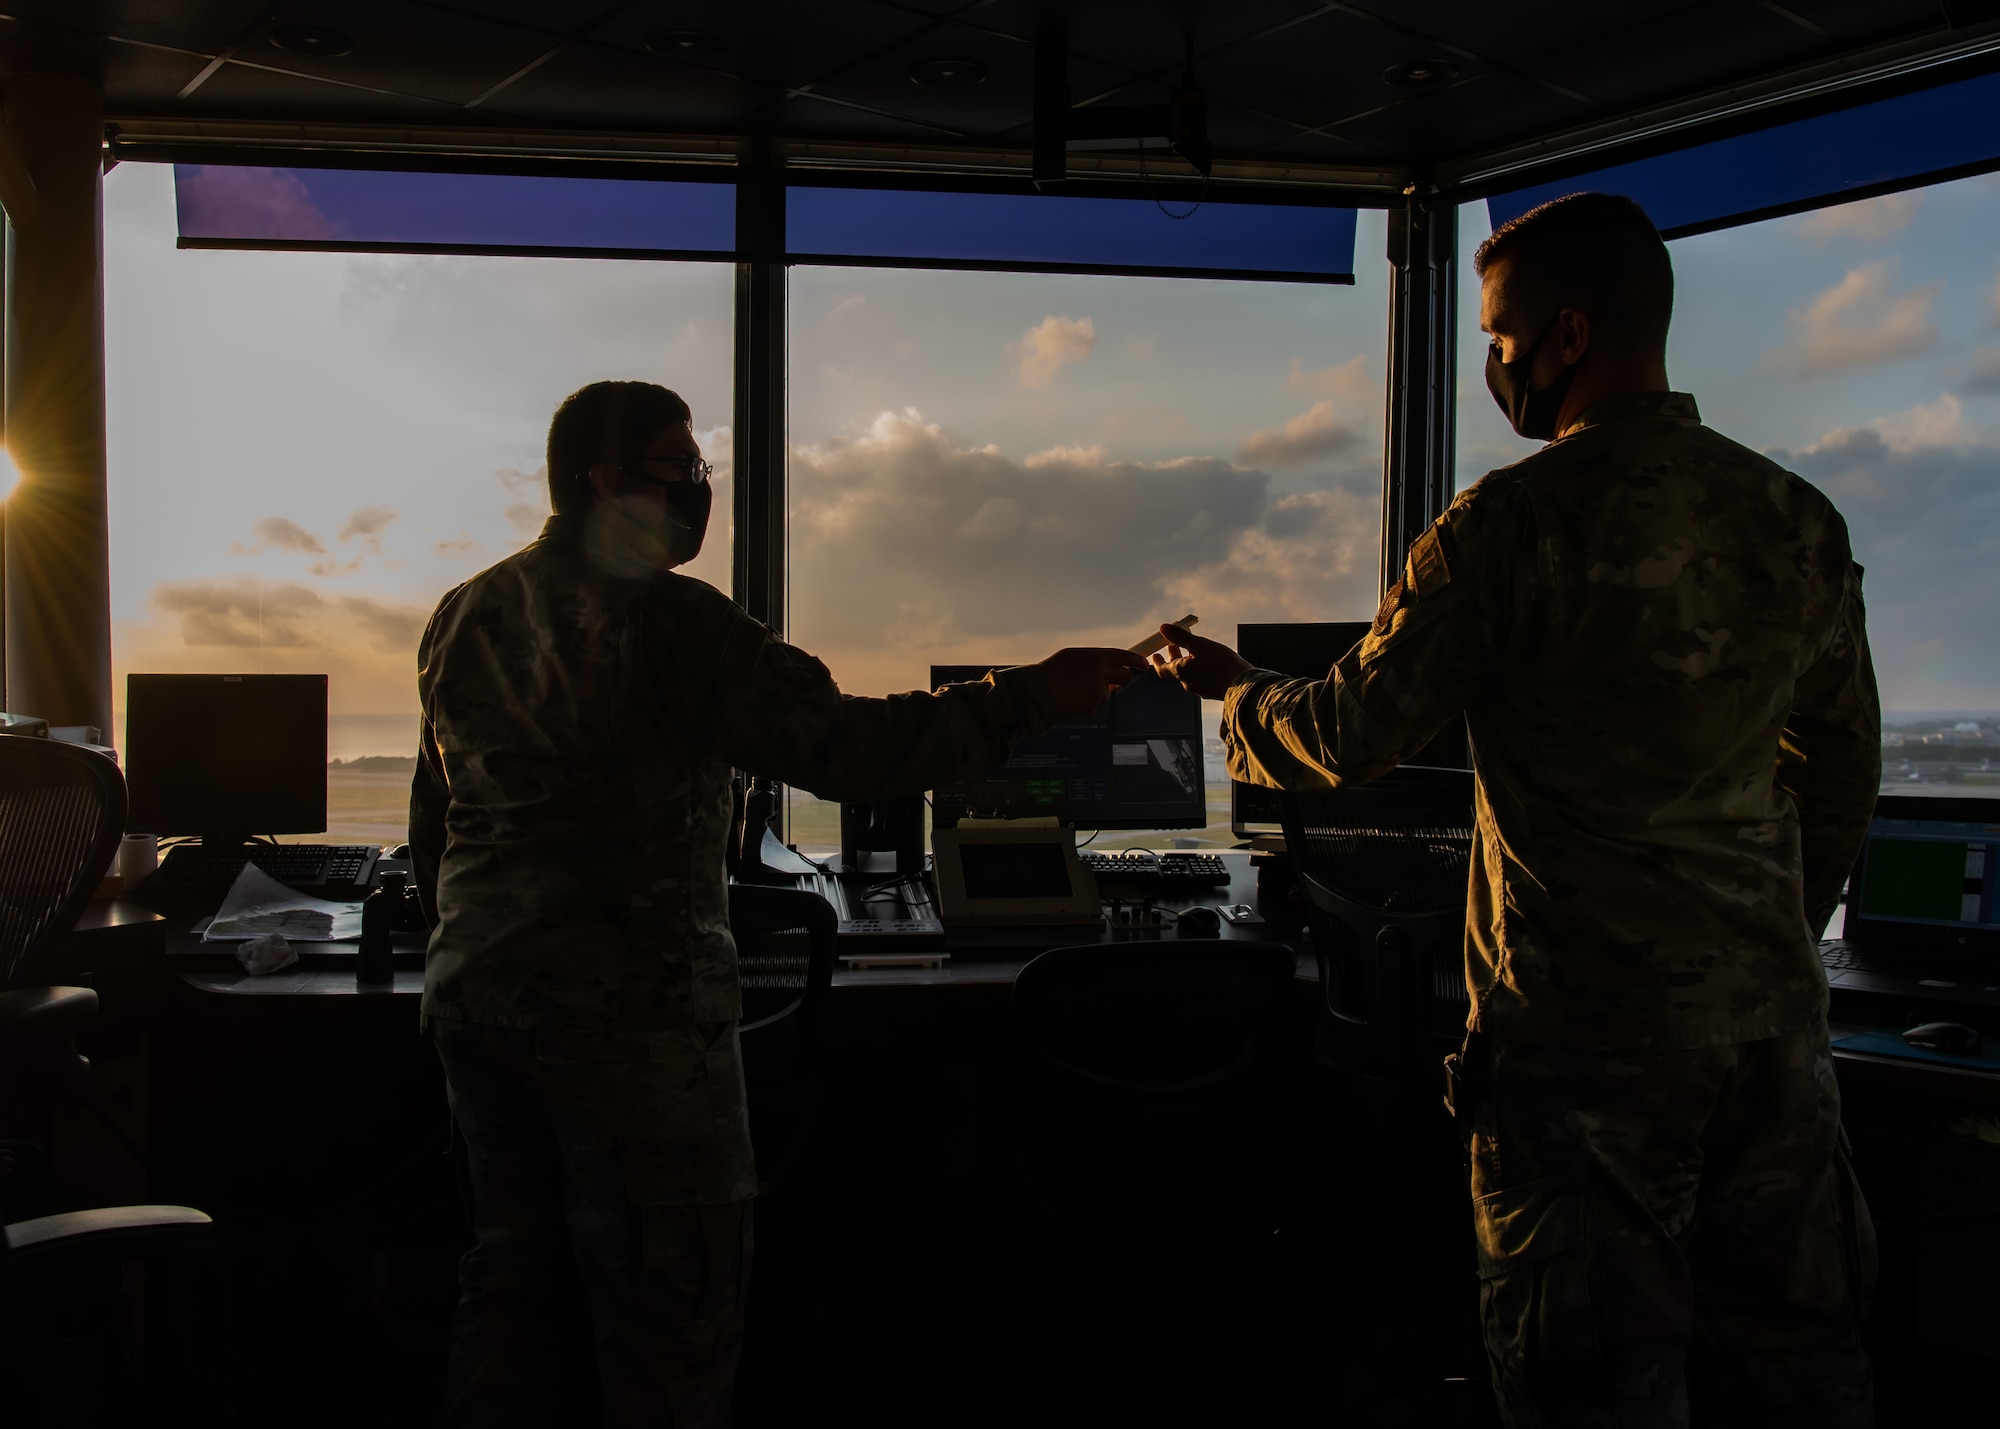 An Airman hands something to another Airman.